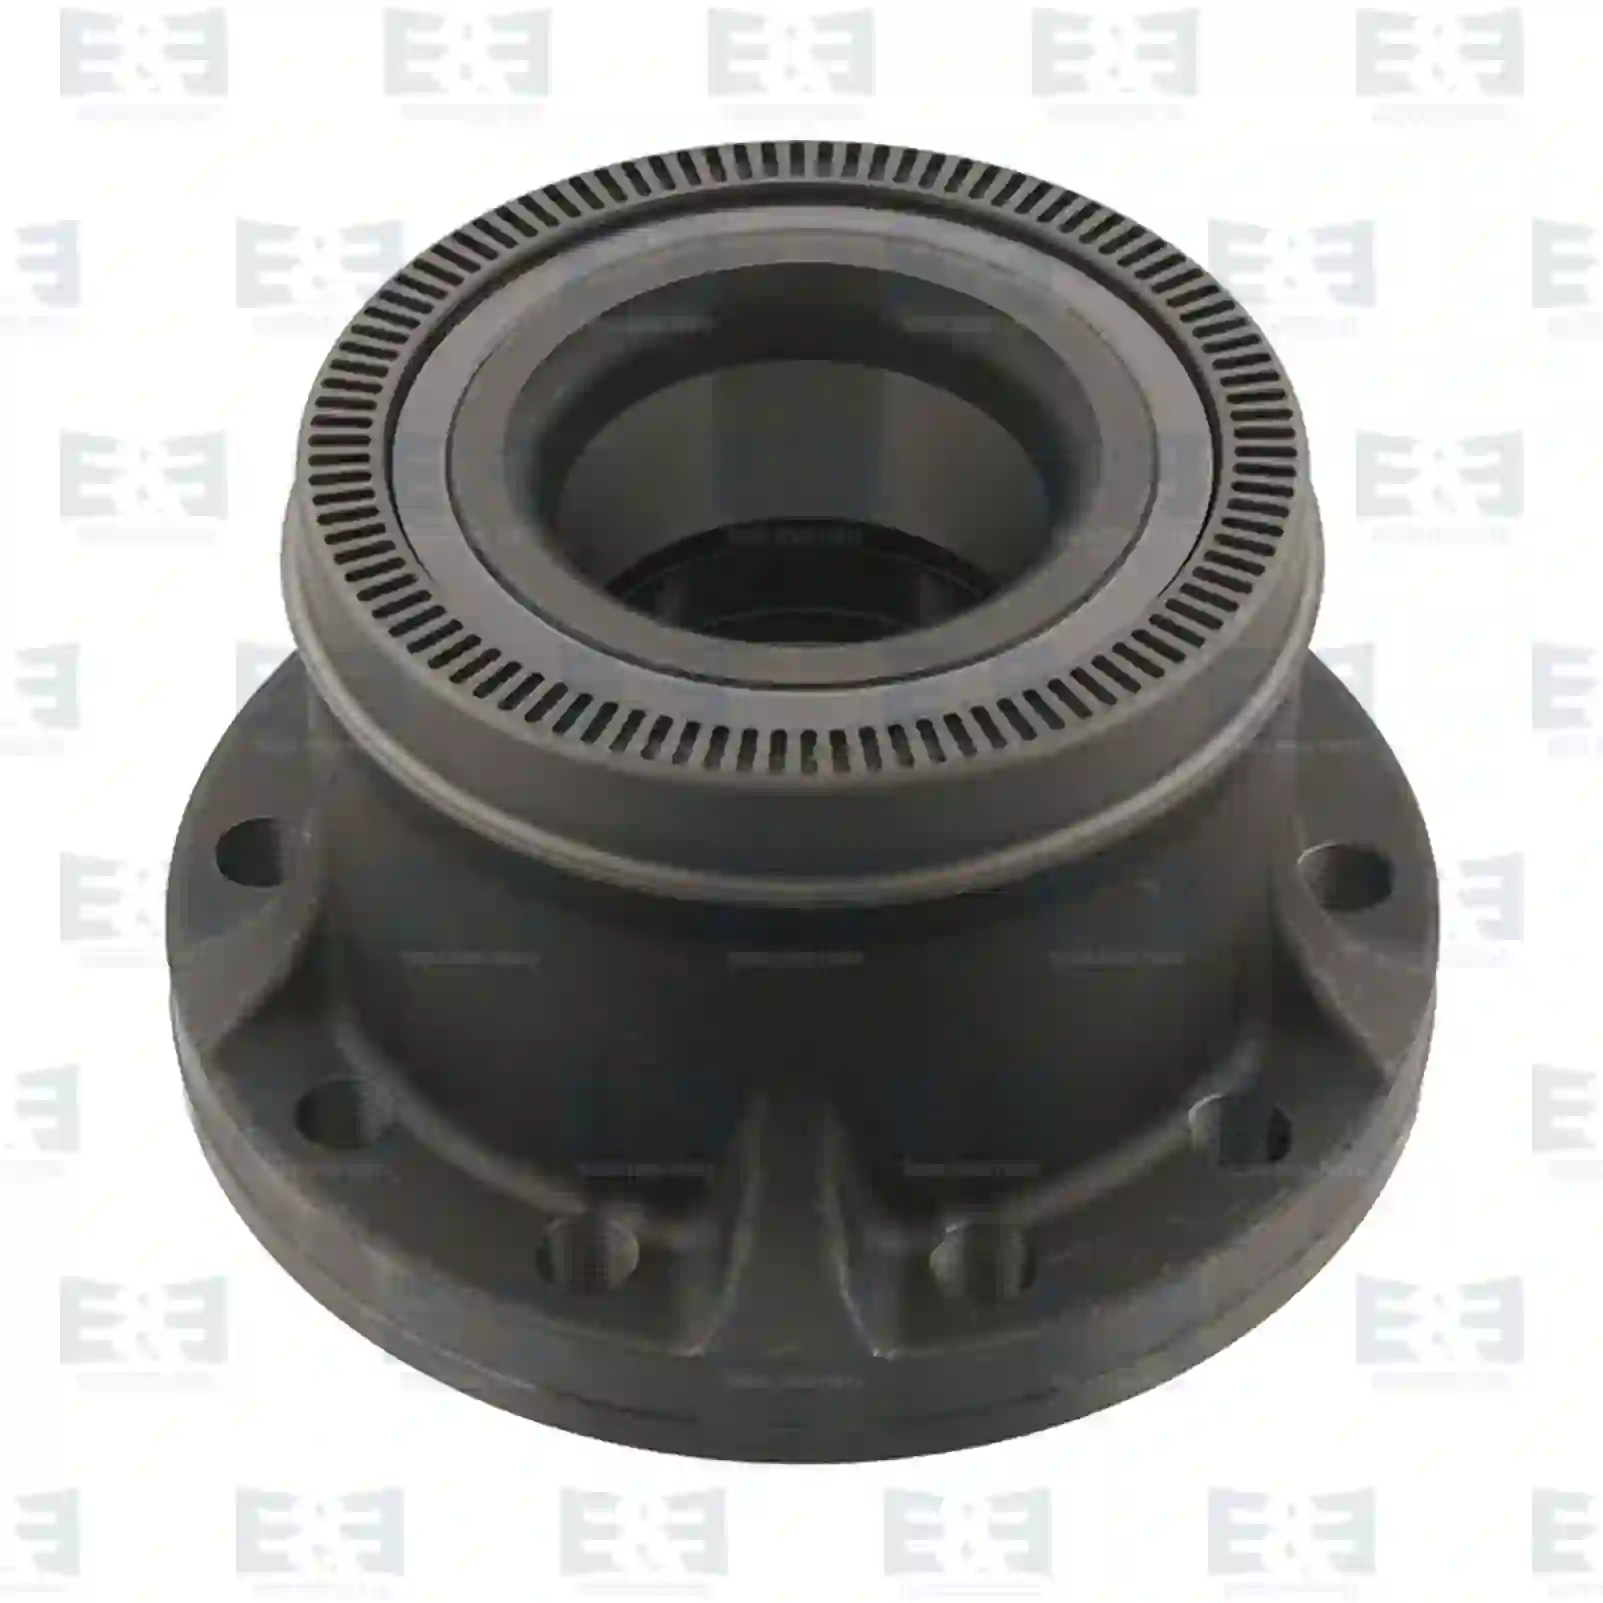 Wheel bearing unit, with ABS ring, 2E2284941, 504189654, 5010439770, 5010439770, 20764313, ZG30198-0008 ||  2E2284941 E&E Truck Spare Parts | Truck Spare Parts, Auotomotive Spare Parts Wheel bearing unit, with ABS ring, 2E2284941, 504189654, 5010439770, 5010439770, 20764313, ZG30198-0008 ||  2E2284941 E&E Truck Spare Parts | Truck Spare Parts, Auotomotive Spare Parts